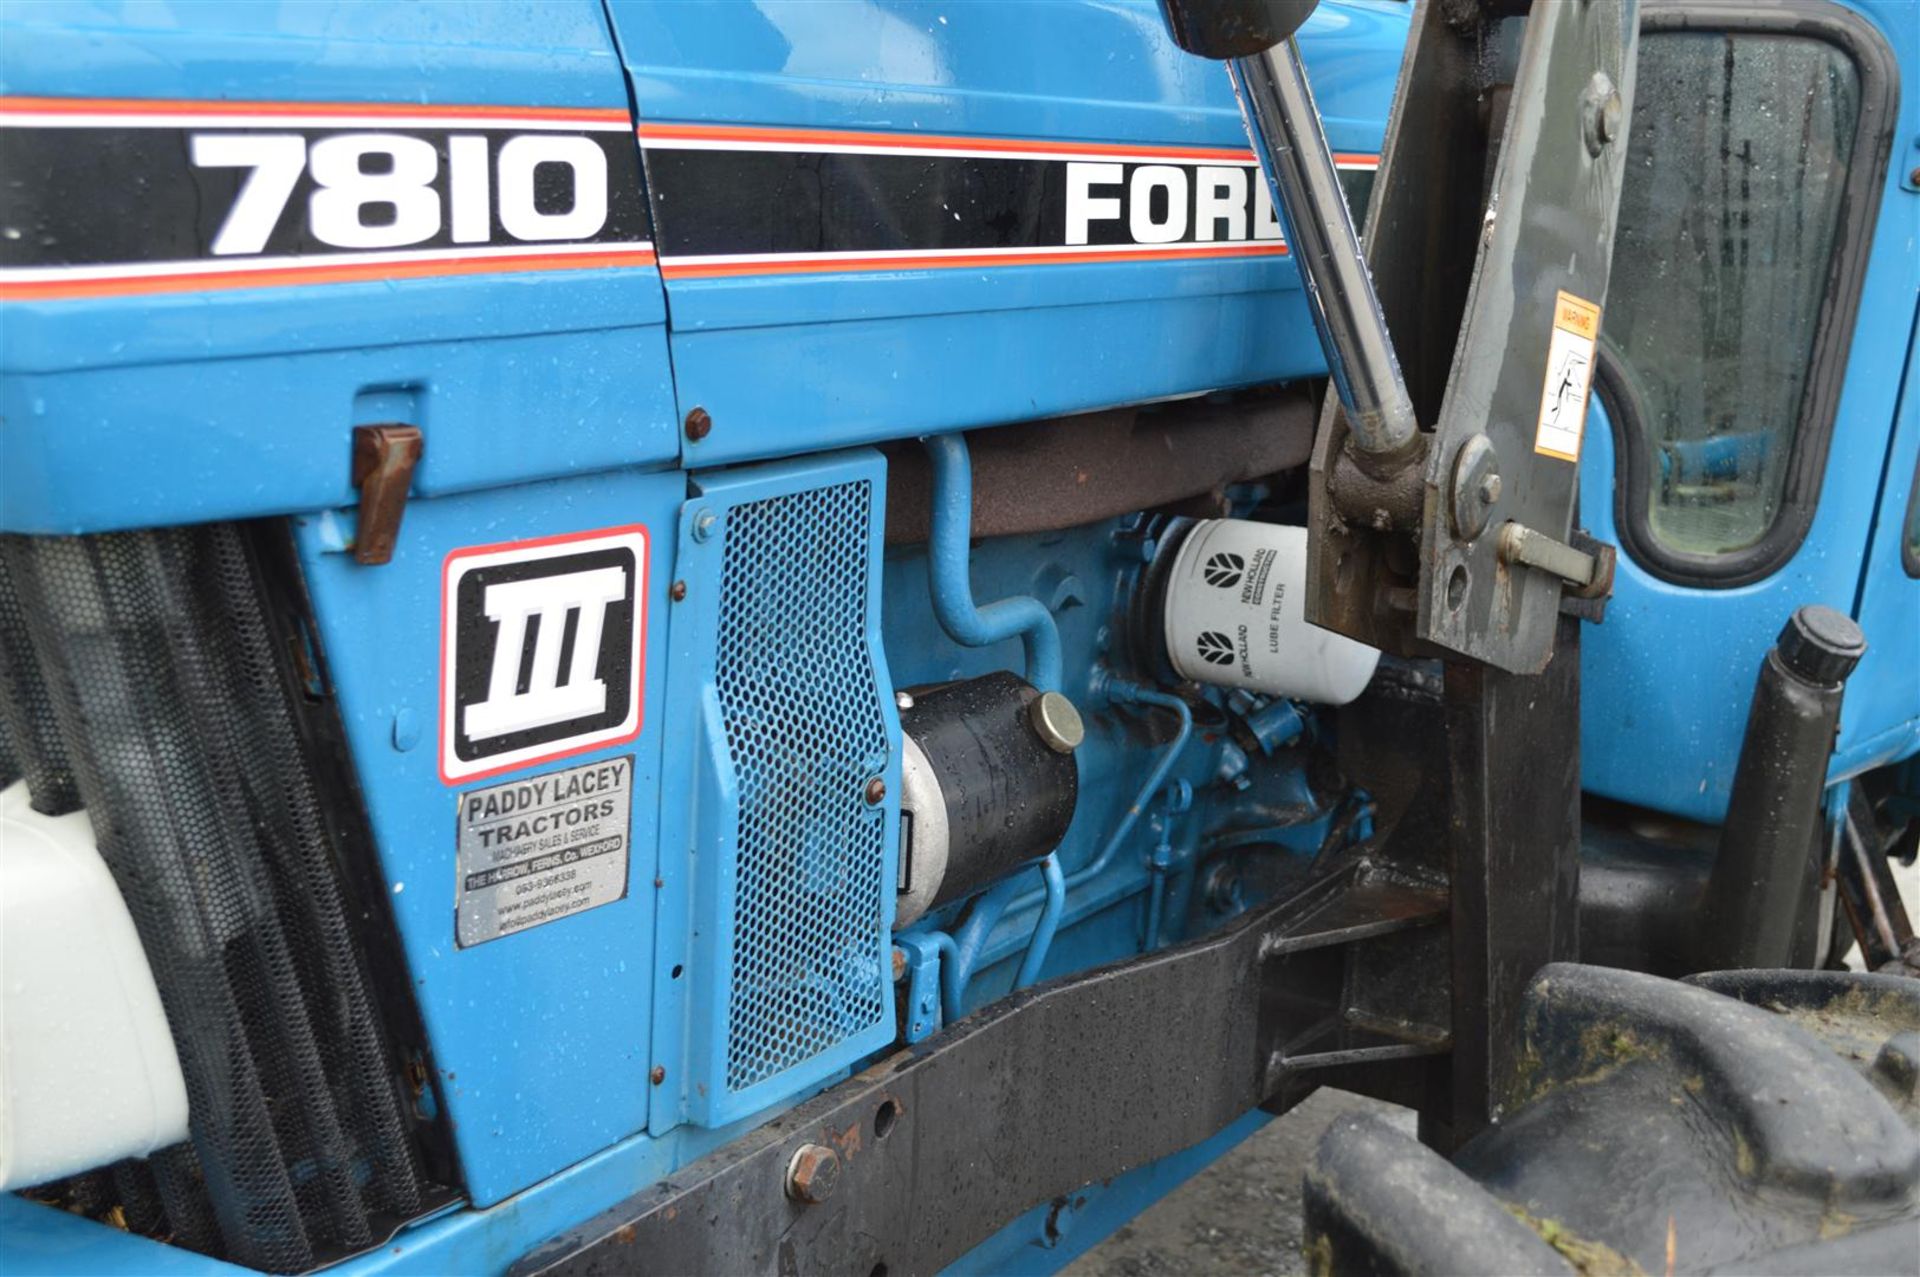 1991 FORD 7810 Series III 4wd 6cylinder TRACTOR Reg No: 91WW11001 (Irish) Serial No: BC74846 - Image 7 of 7